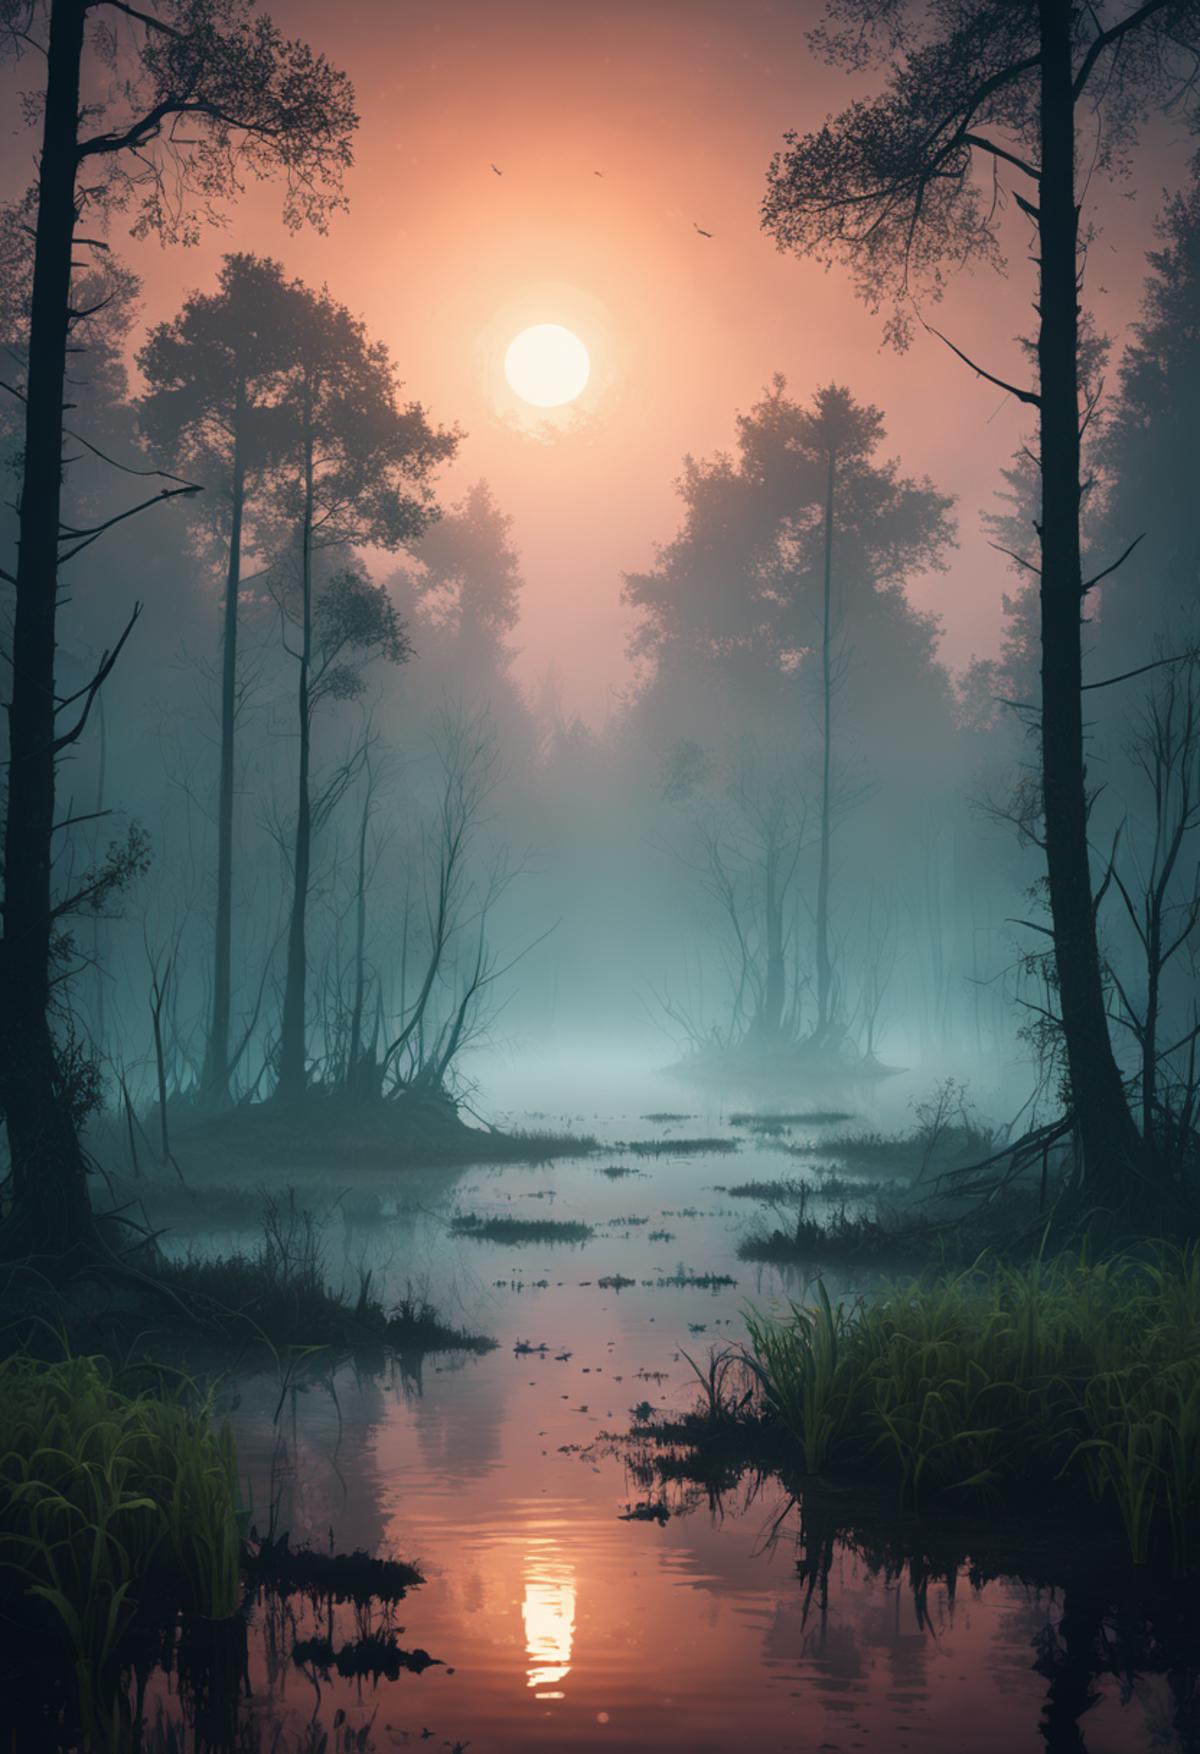 A serene forest scene with a sunset in the background.